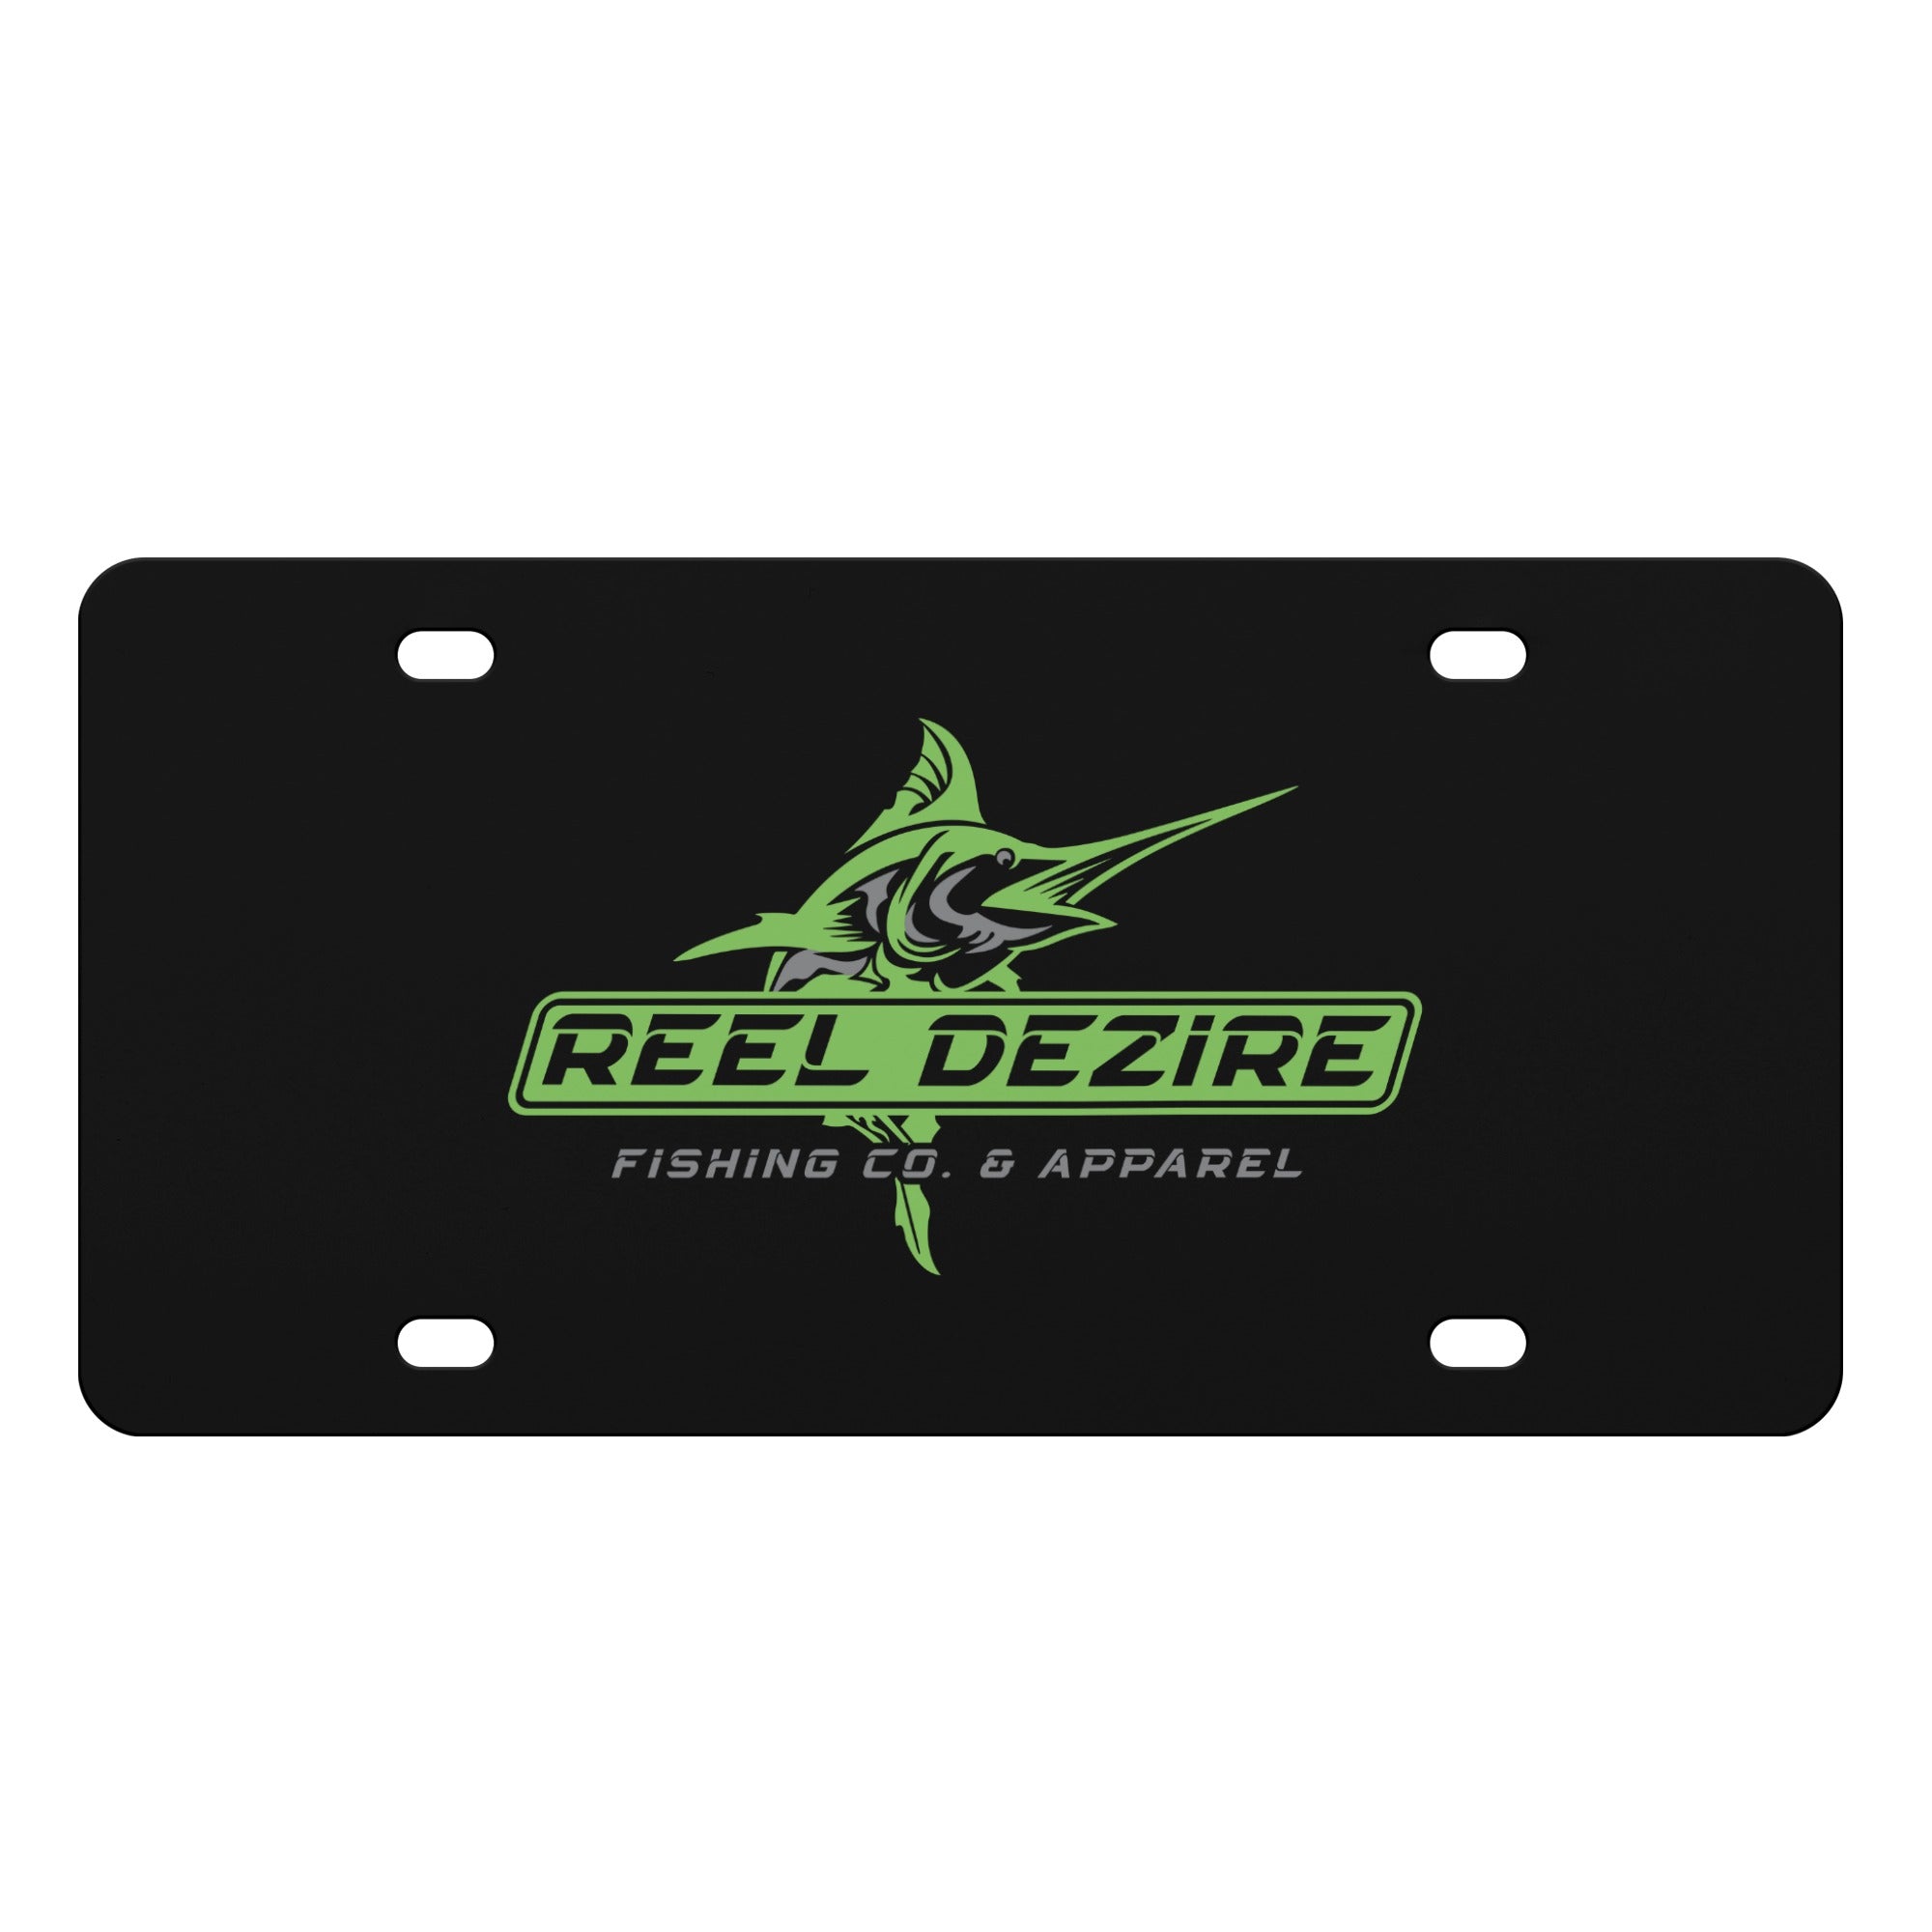 License Plates – Tagged License Plates – ReelDezire